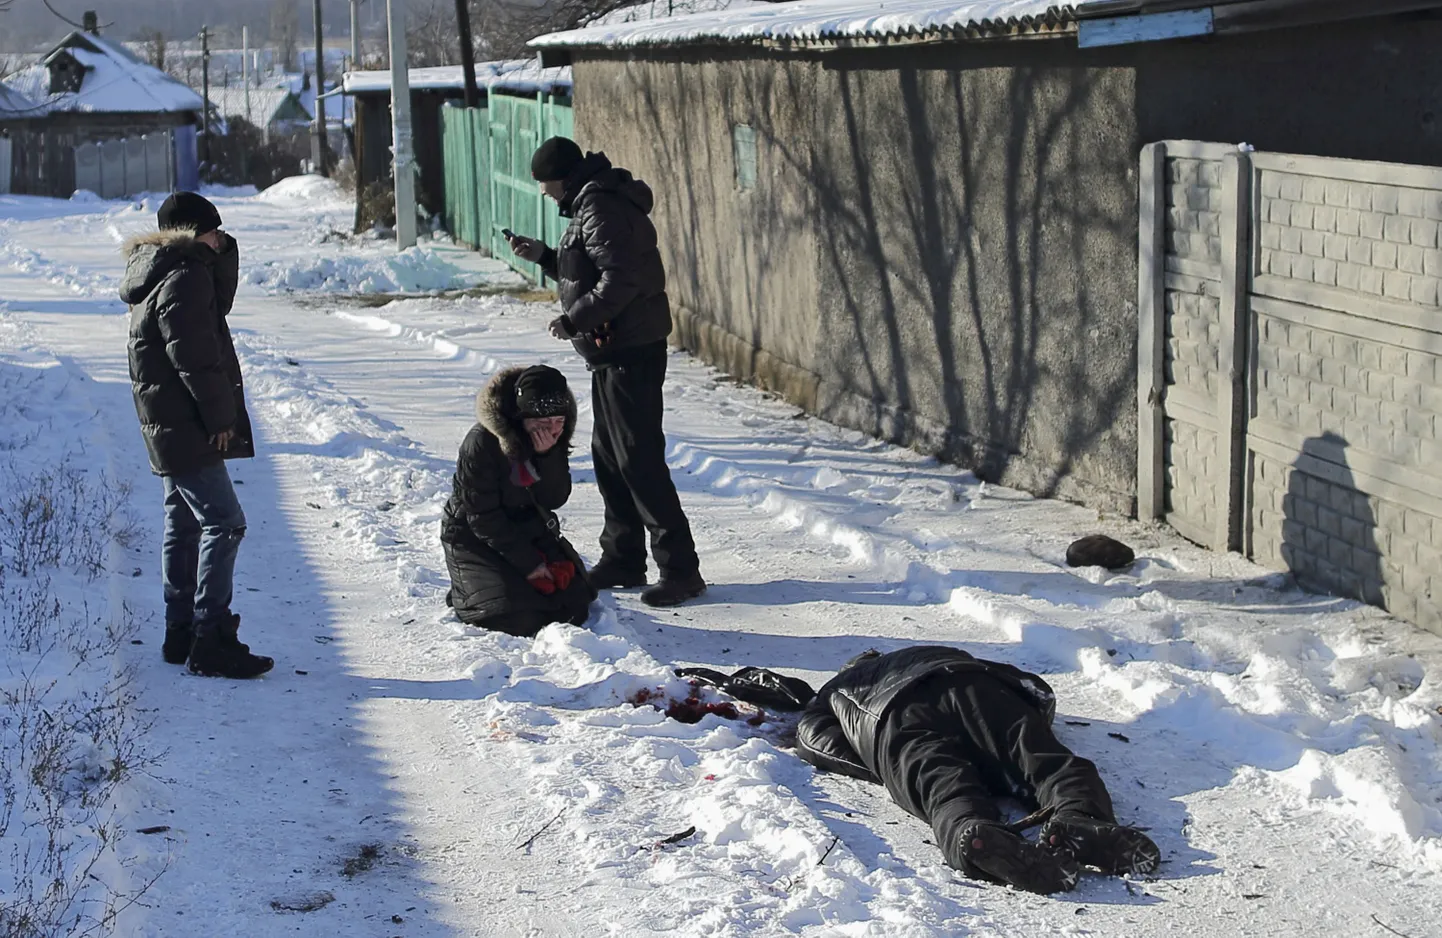 ATTENTION EDITORS - VISUAL COVERAGE OF SCENES OF INJURY OR DEATH 

Galina Bayeva cries with her son (L) and husband (R) next to the body of her father Vladimir Churilov who was killed by recent shelling at the Azotny district in Donetsk, eastern Ukraine, December 5, 2014. Bayeva's parents were out walking in the neighbourhood when they were hit by a shelling attack, leaving her father dead and her mother with severe injuries. REUTERS/Antonio Bronic (UKRAINE - Tags: CIVIL UNREST POLITICS SOCIETY CONFLICT) TEMPLATE OUT